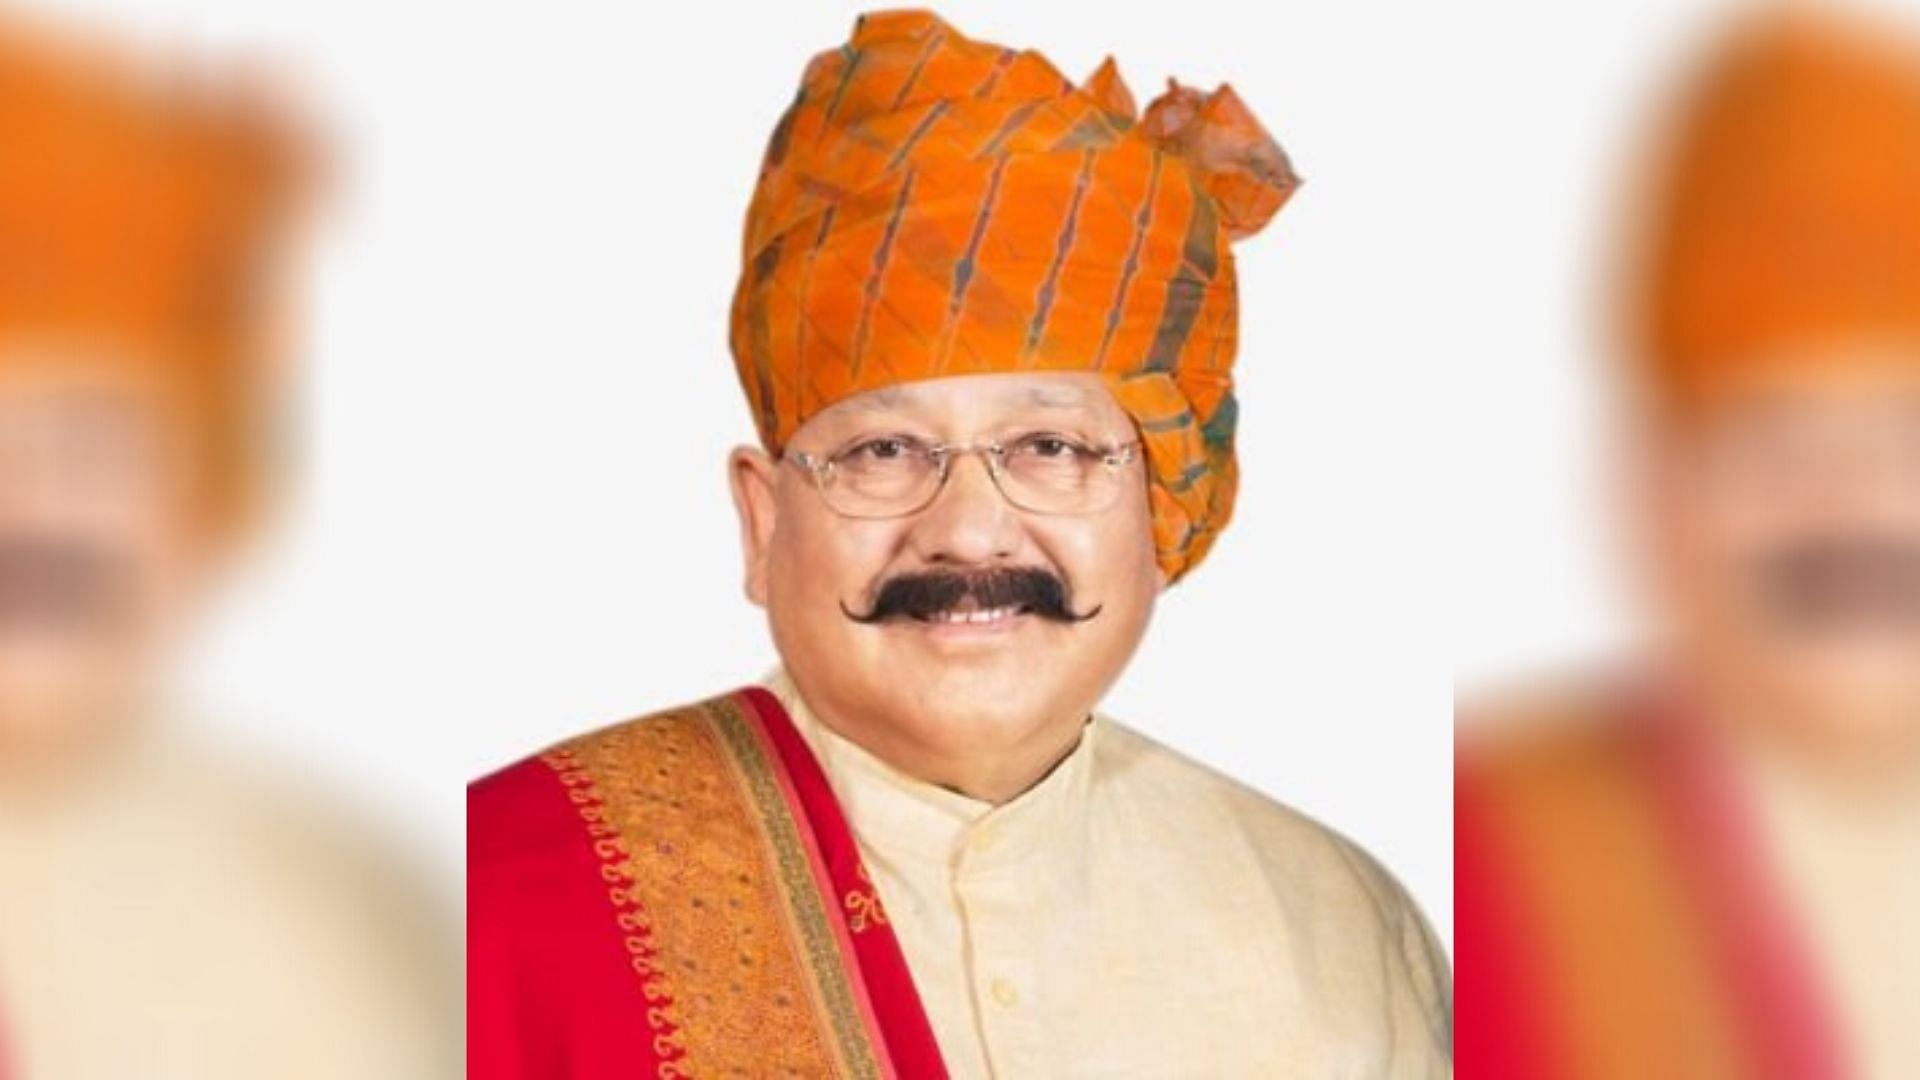 State tourism minister and famed spiritual leader, Satpal Maharaj had tested positive for COVID-19.